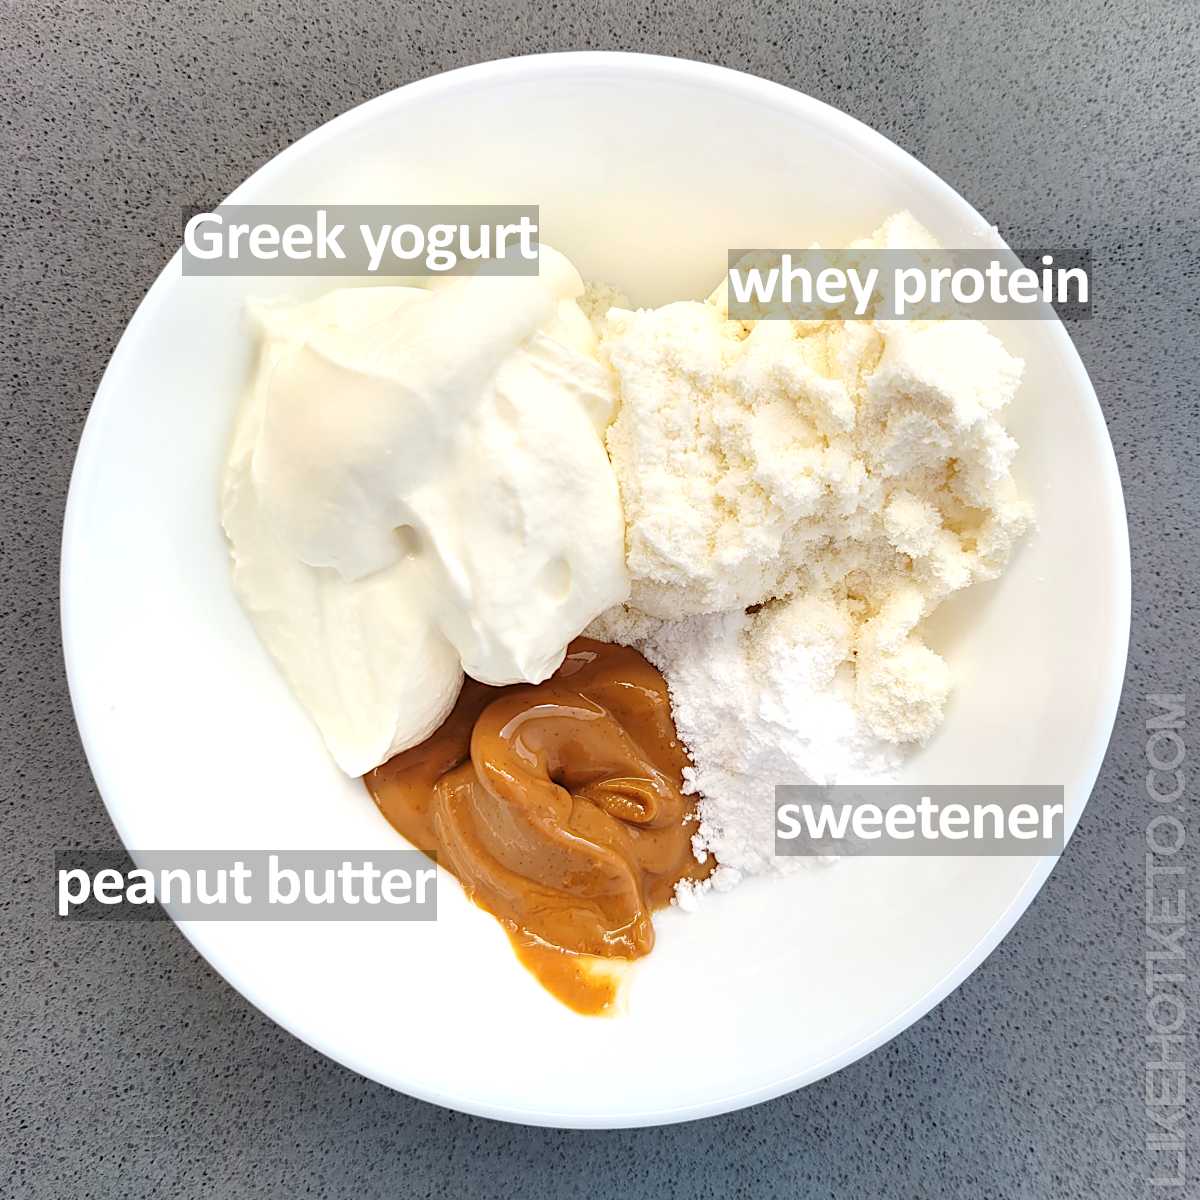 Ingredients for the keto protein bowl: Greek yogurt, peanut butter, whey protein and erythritol.